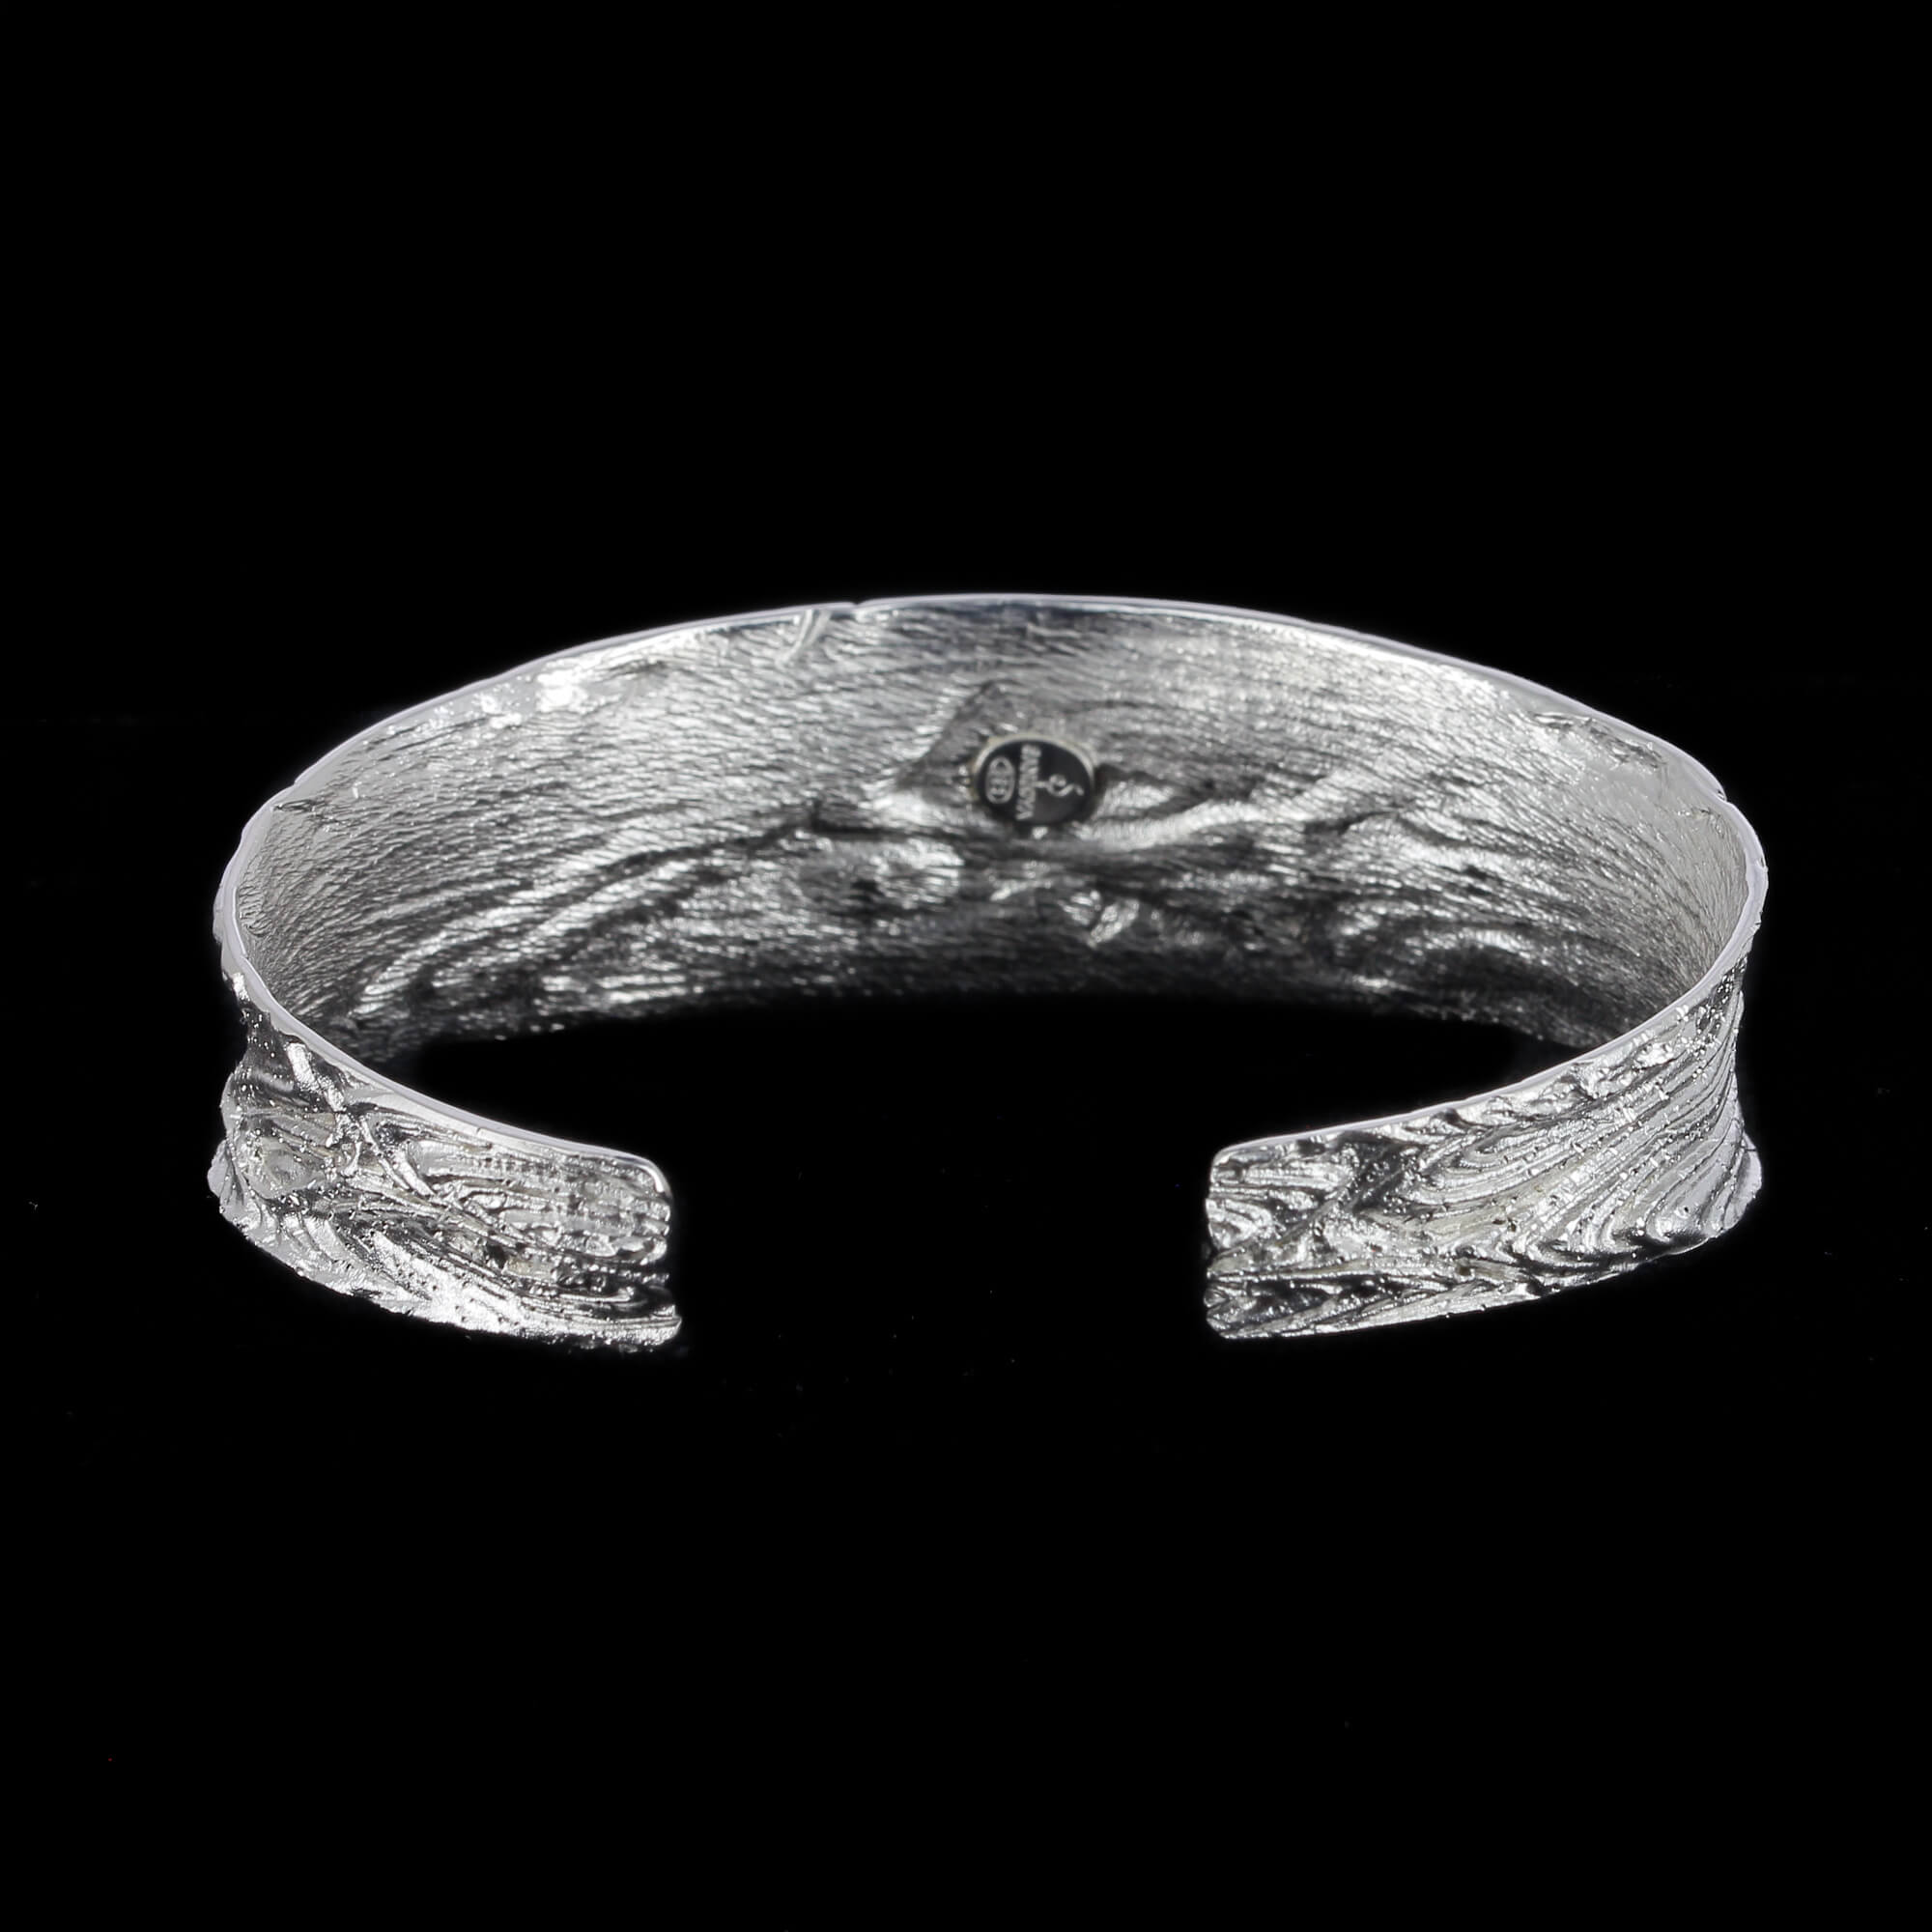 Silver and narrow processed slave bracelet